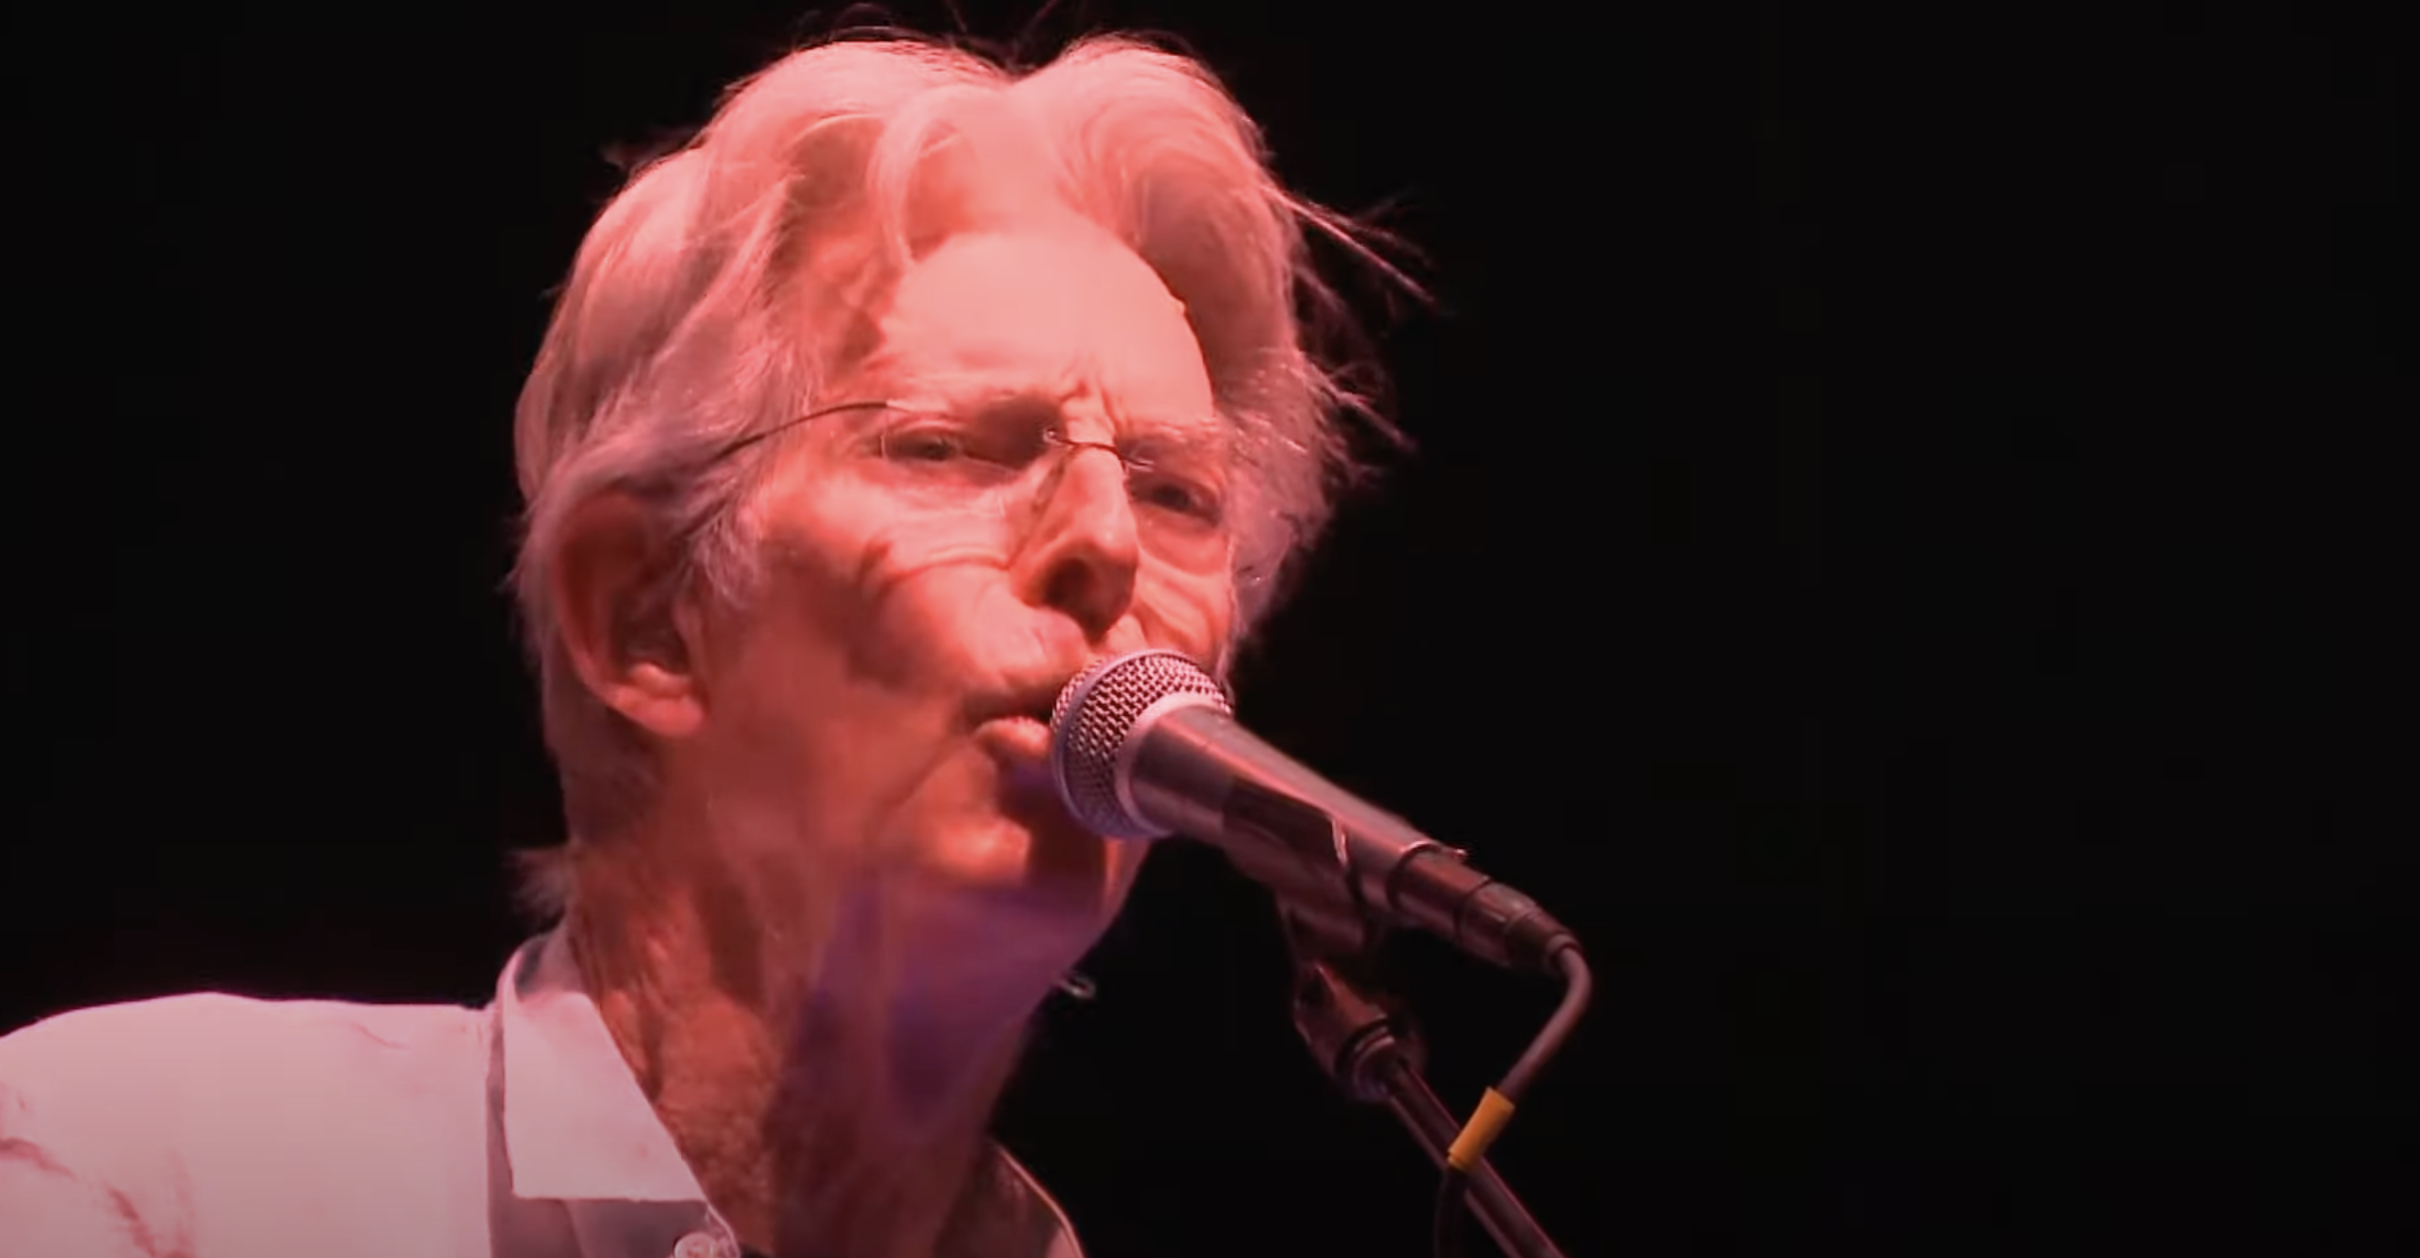 Phil Lesh Opens 9-Show Halloween Run with The Q, Offering Expansive “The Low Spark Of High Heeled Boys” Jam